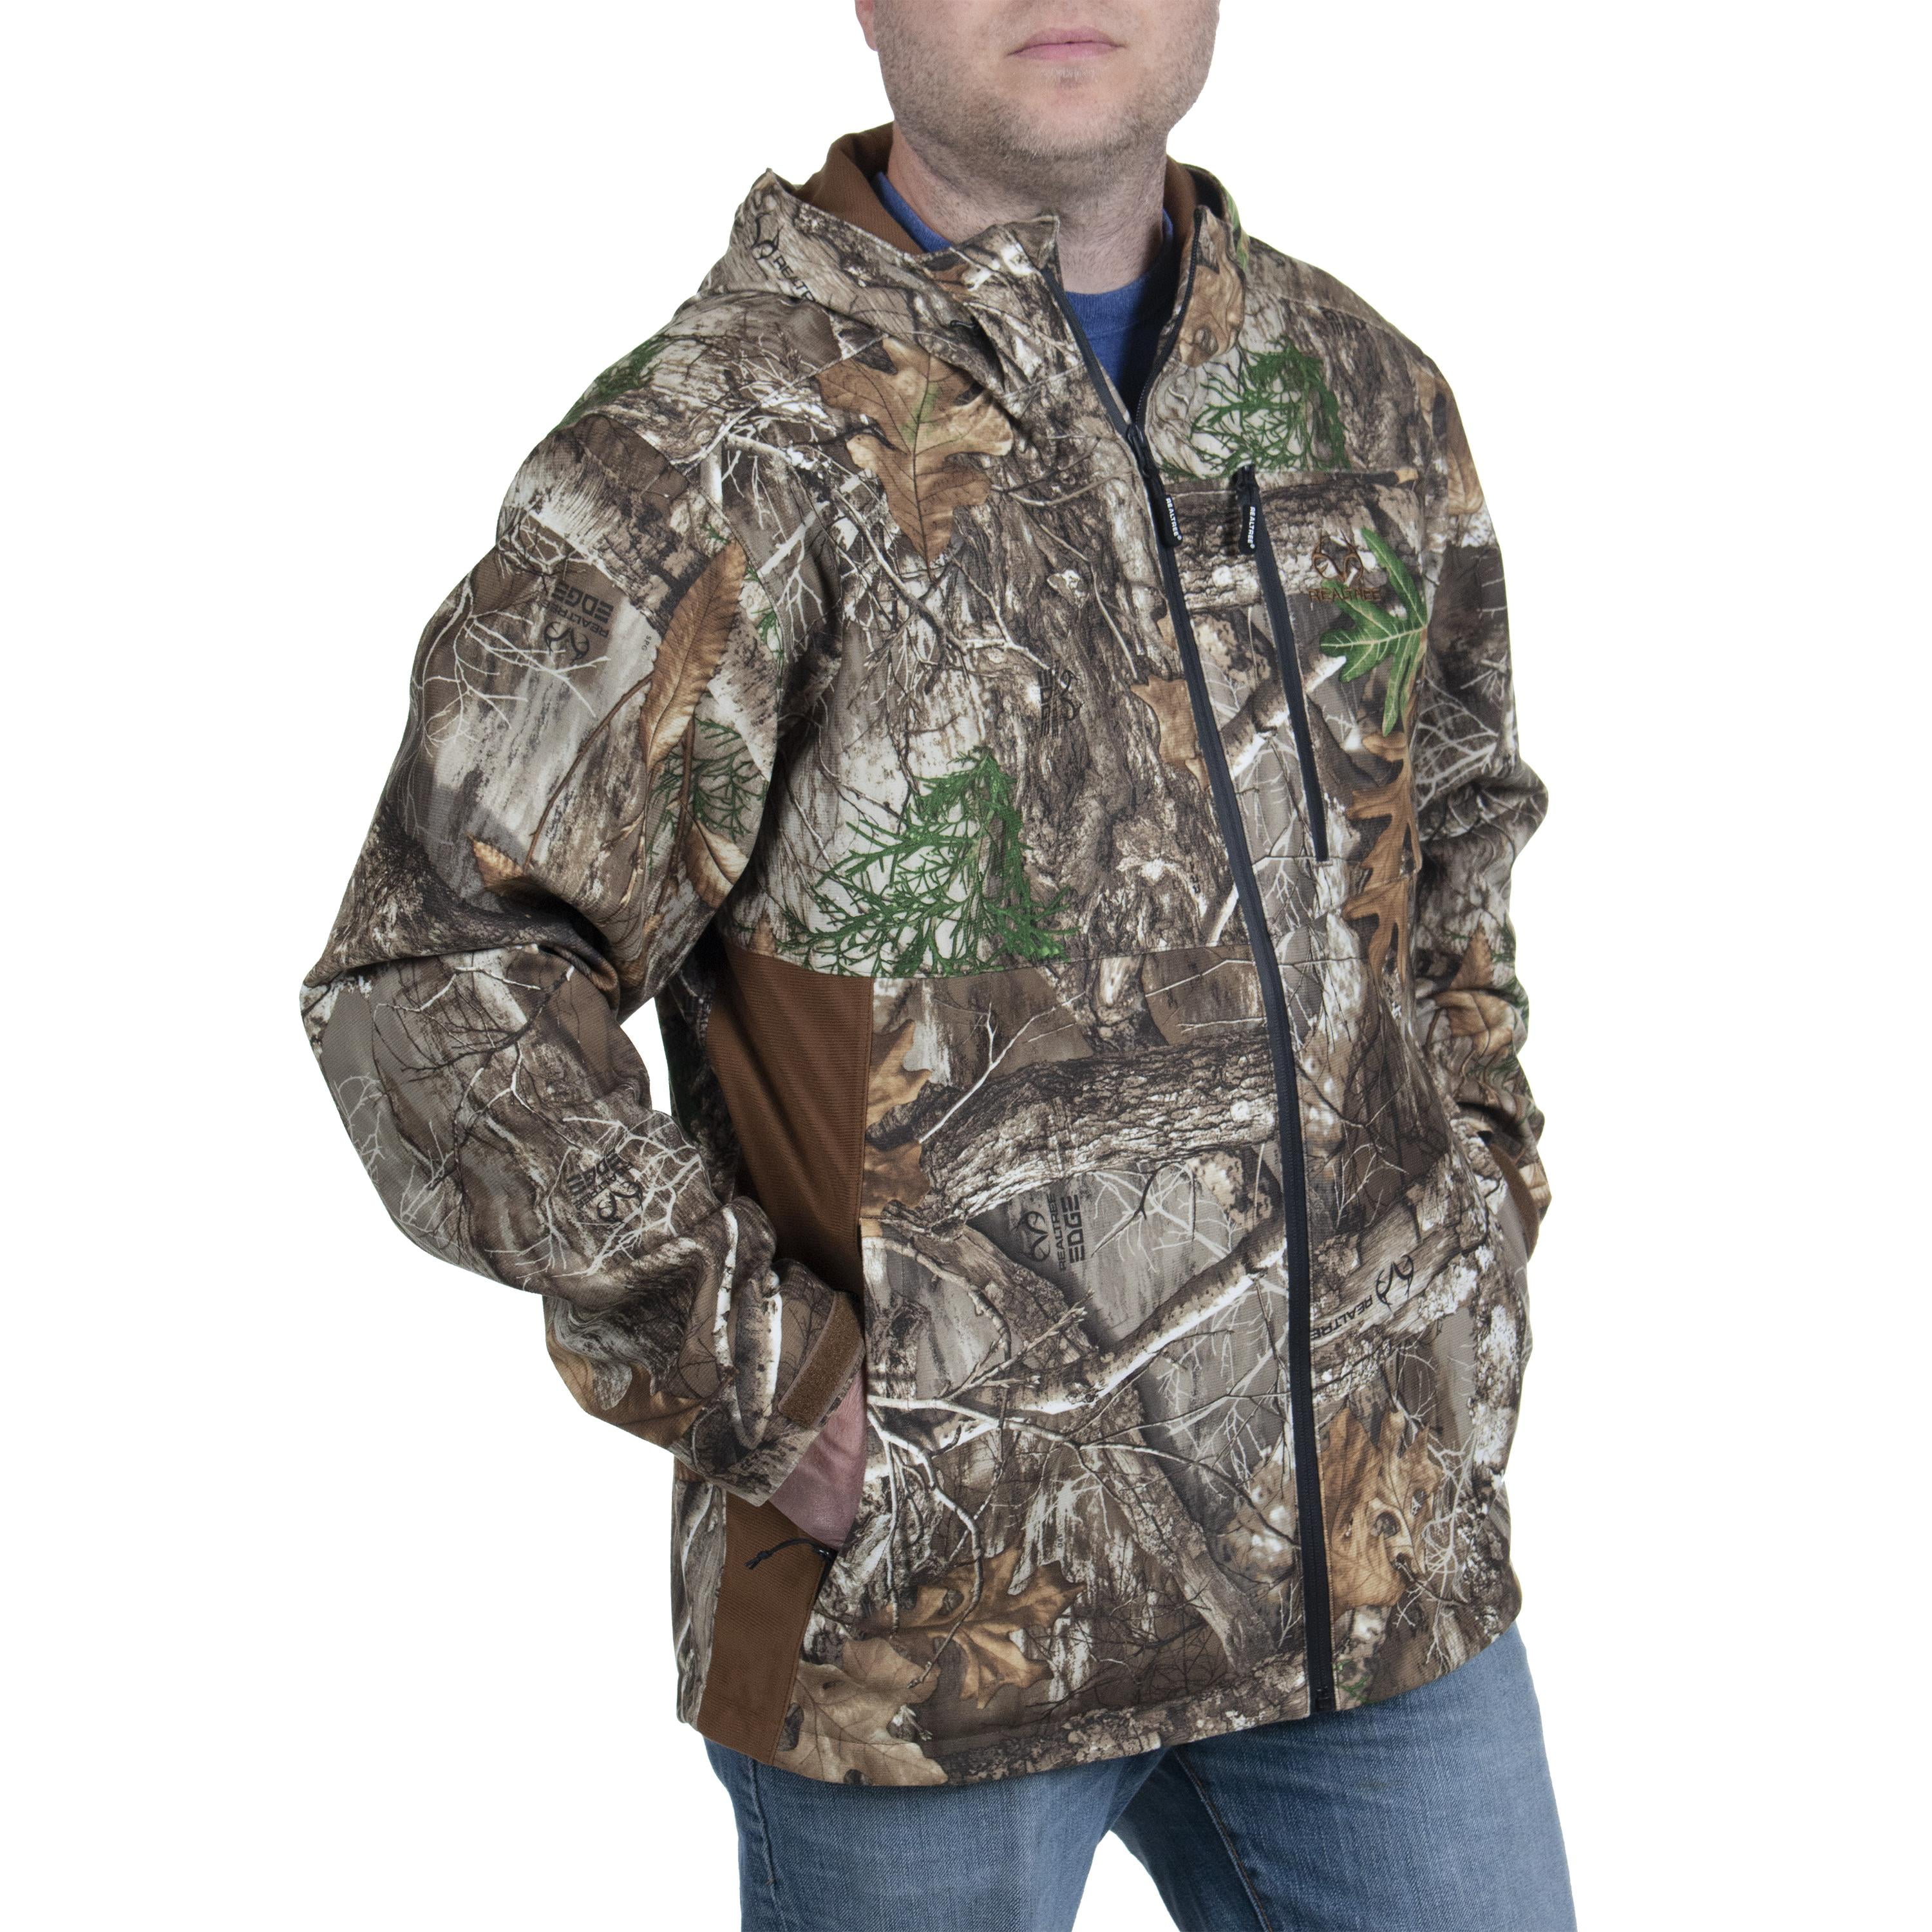 Realtree Men's Scent Factor Hunting Jacket, Realtree Edge, Size